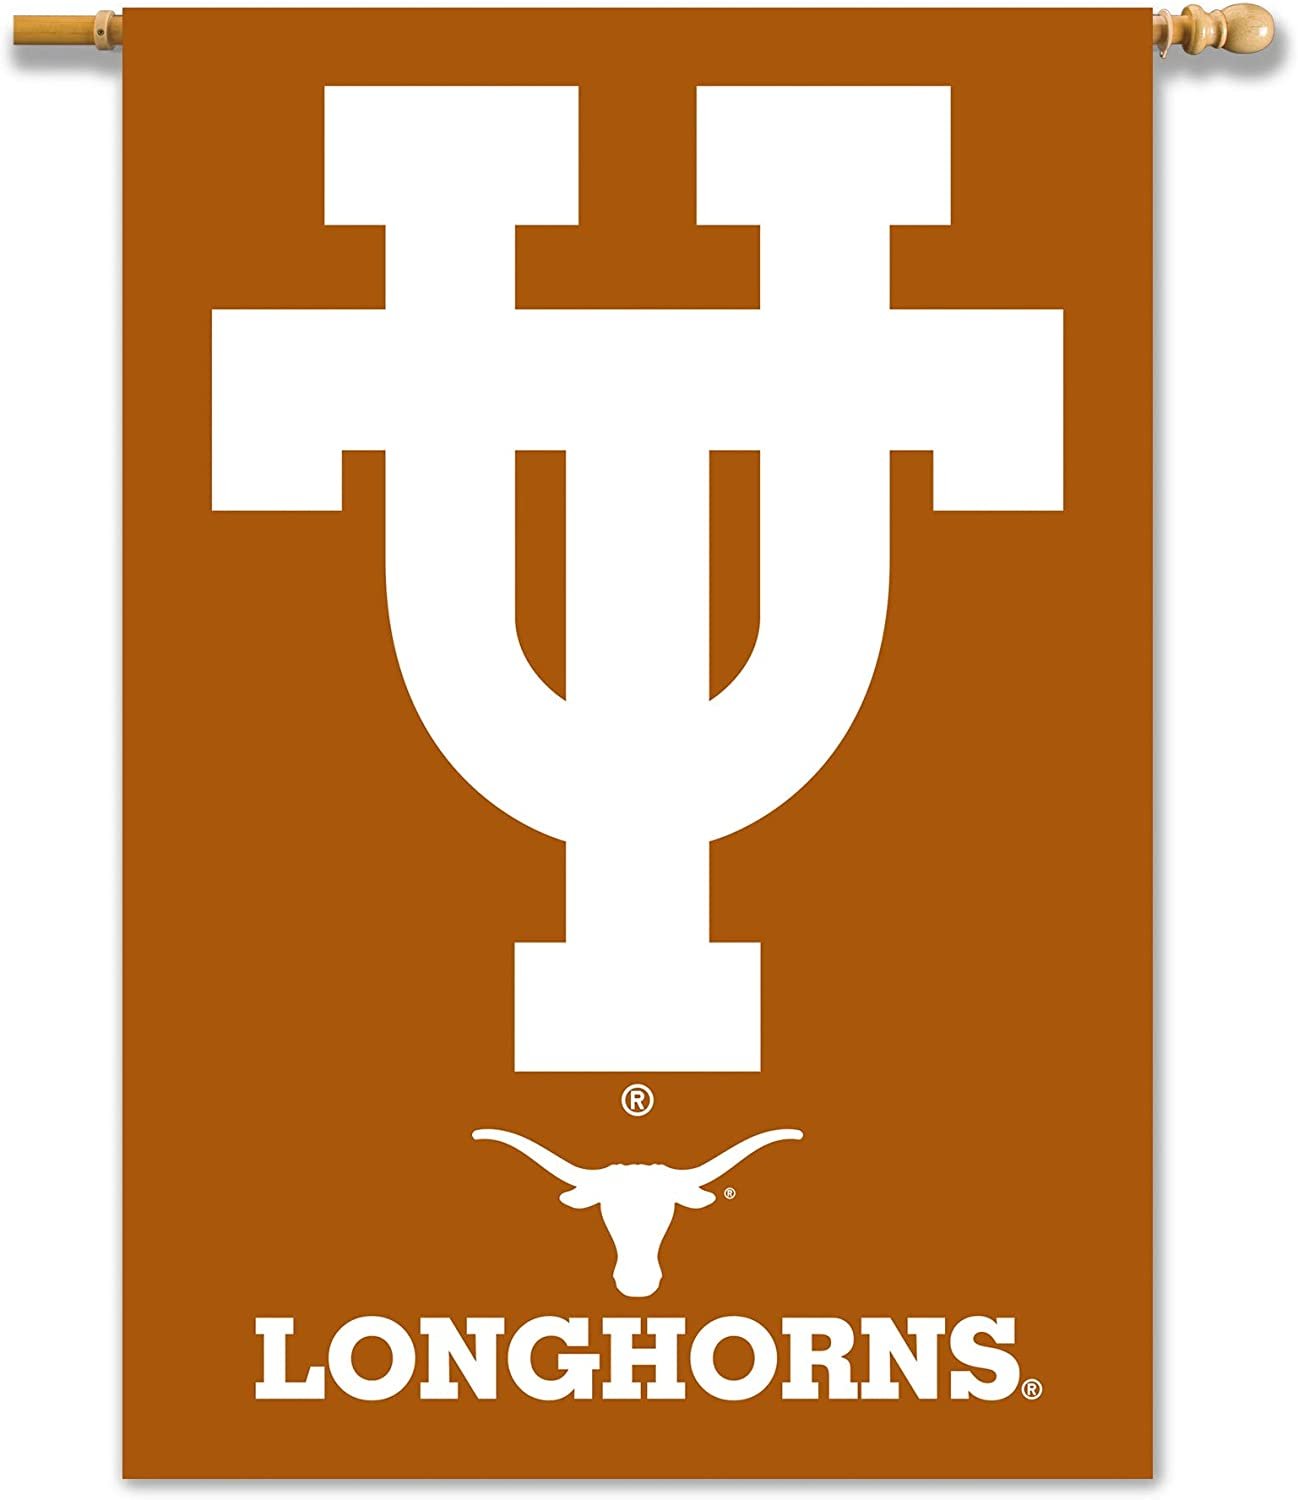 University of Texas Longhorns Premium 2-Sided 28x40 Inch Banner Flag with Pole Sleeve